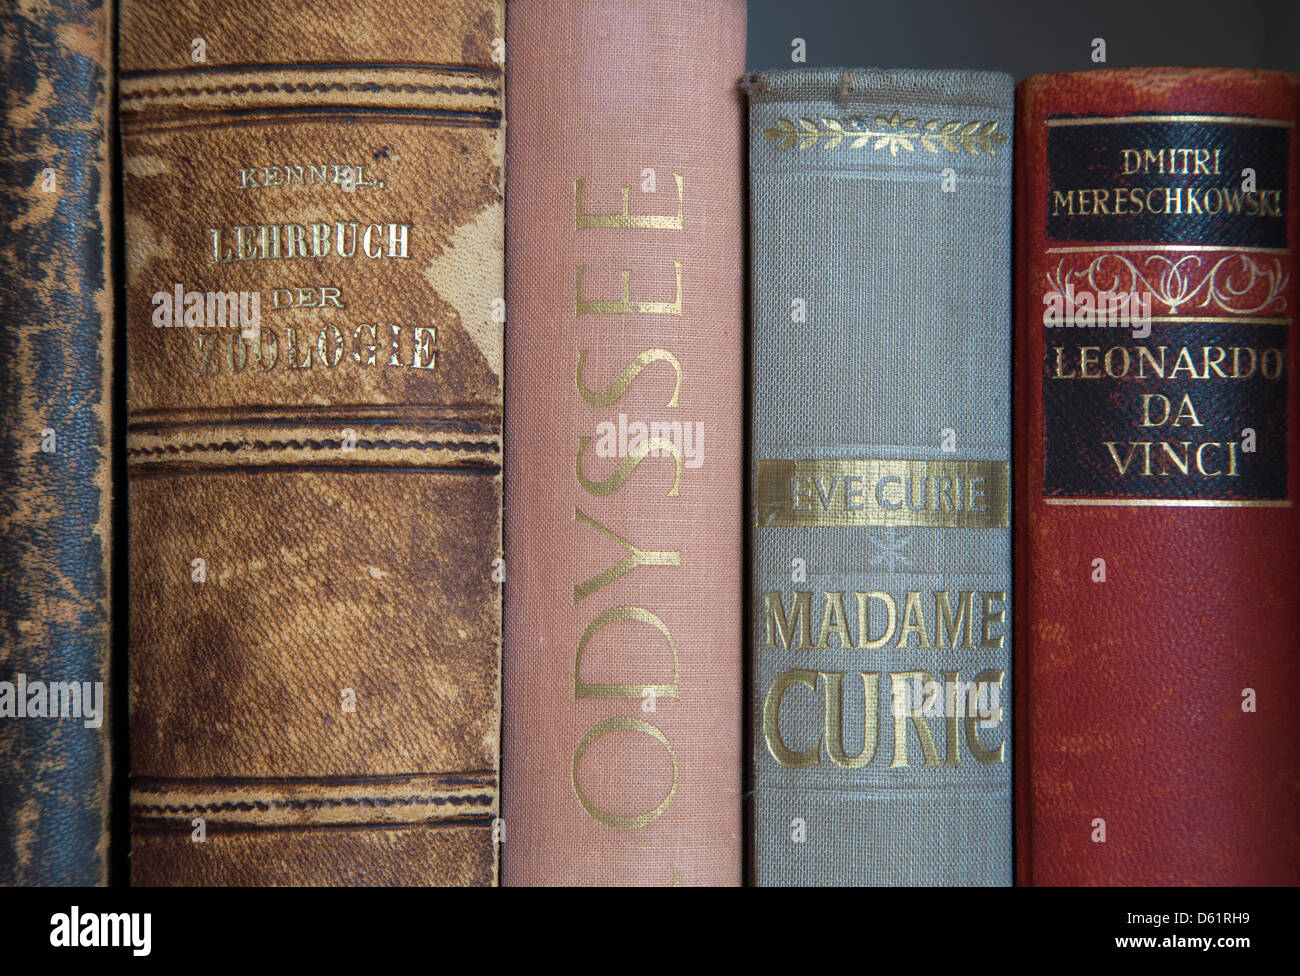 A close up shot of some old books about nature, zoology, Madam Curie, and Leonardo Da Vinci. Alte Bücher. Stock Photo